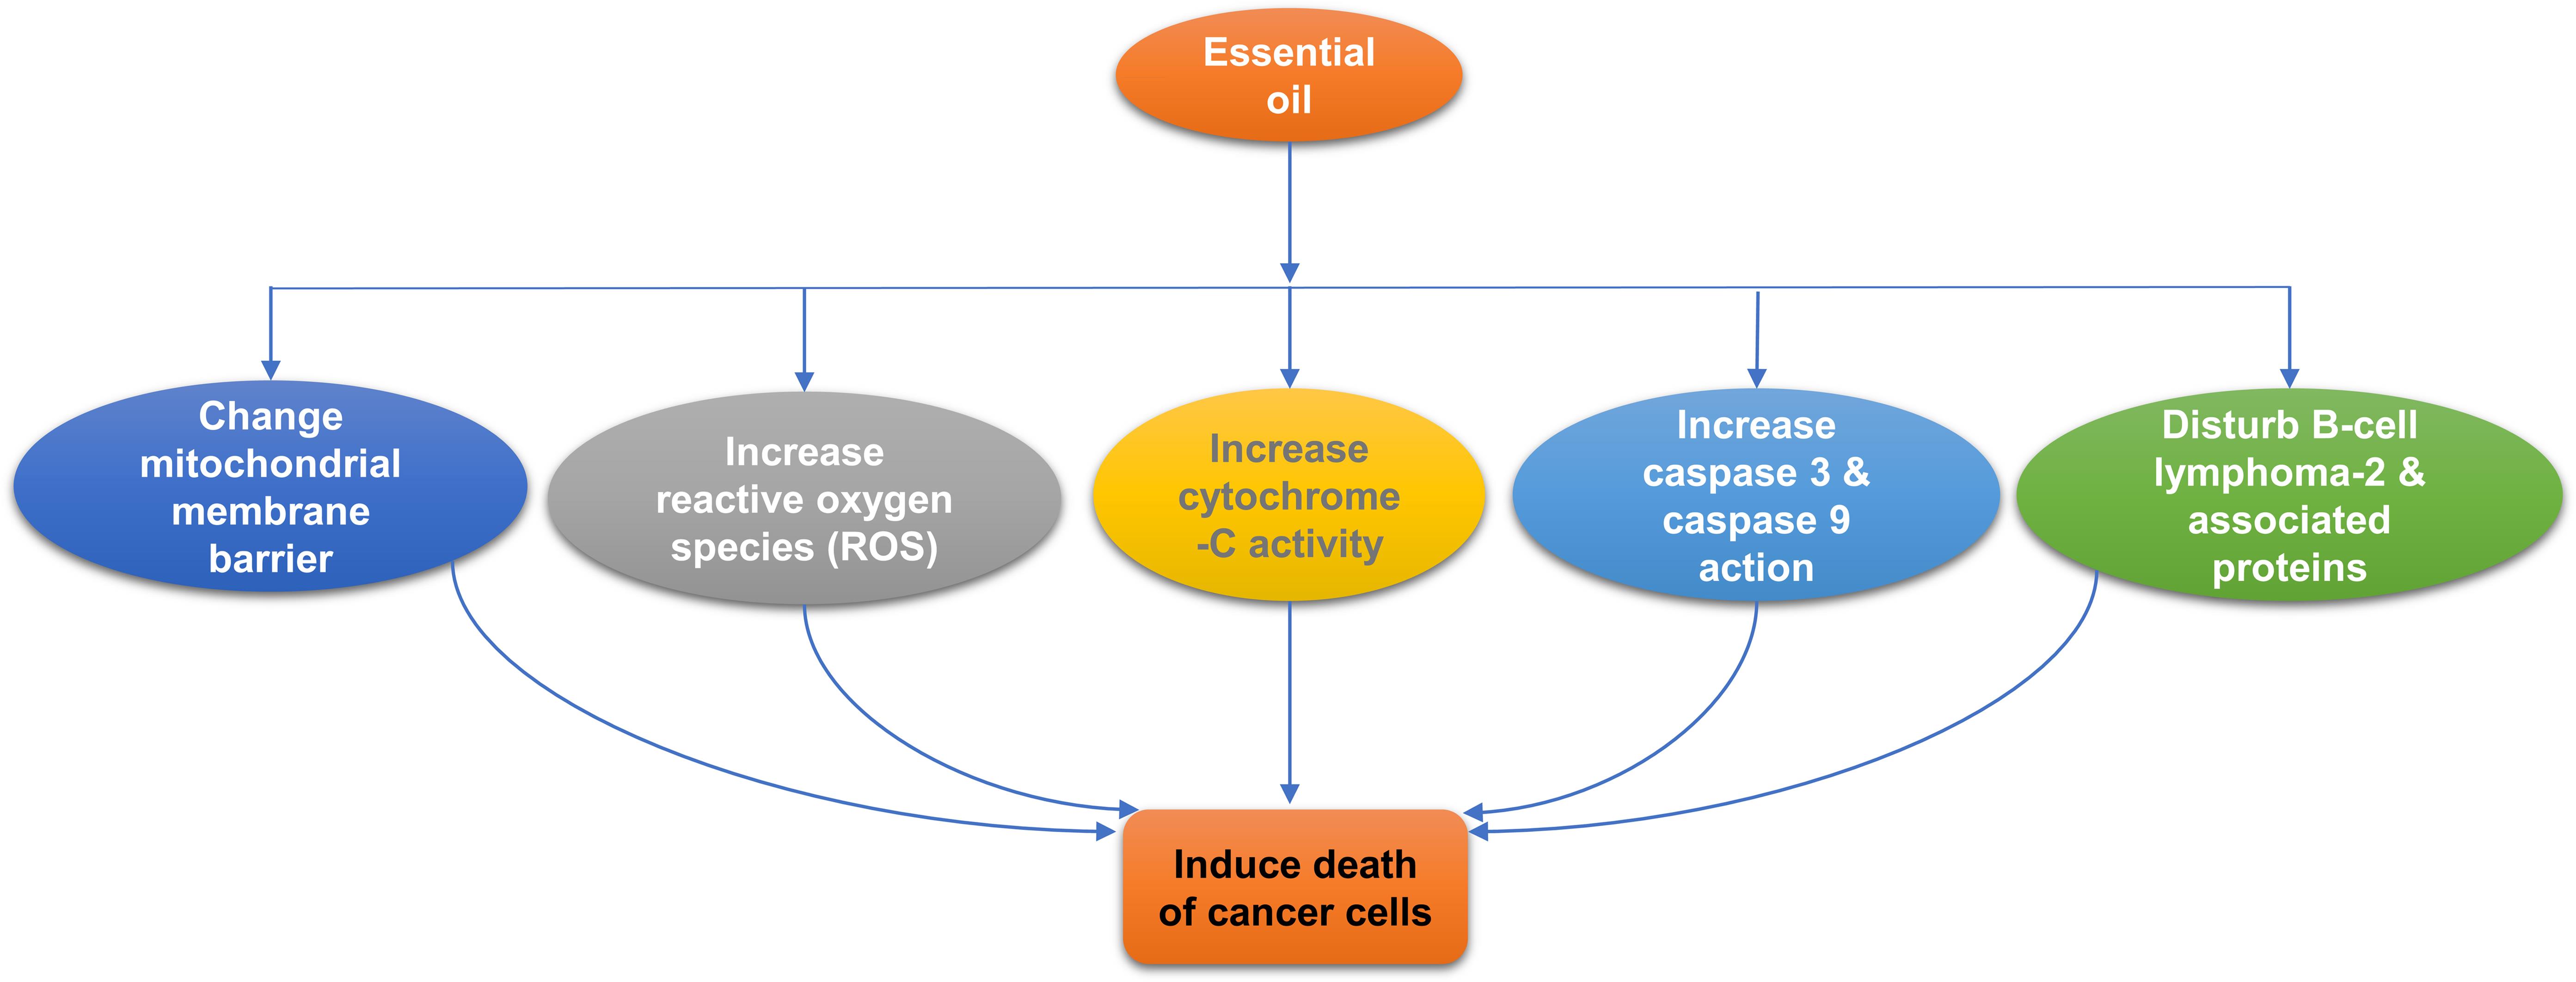 Mechanism of induction of cancer cells death by essential oils.